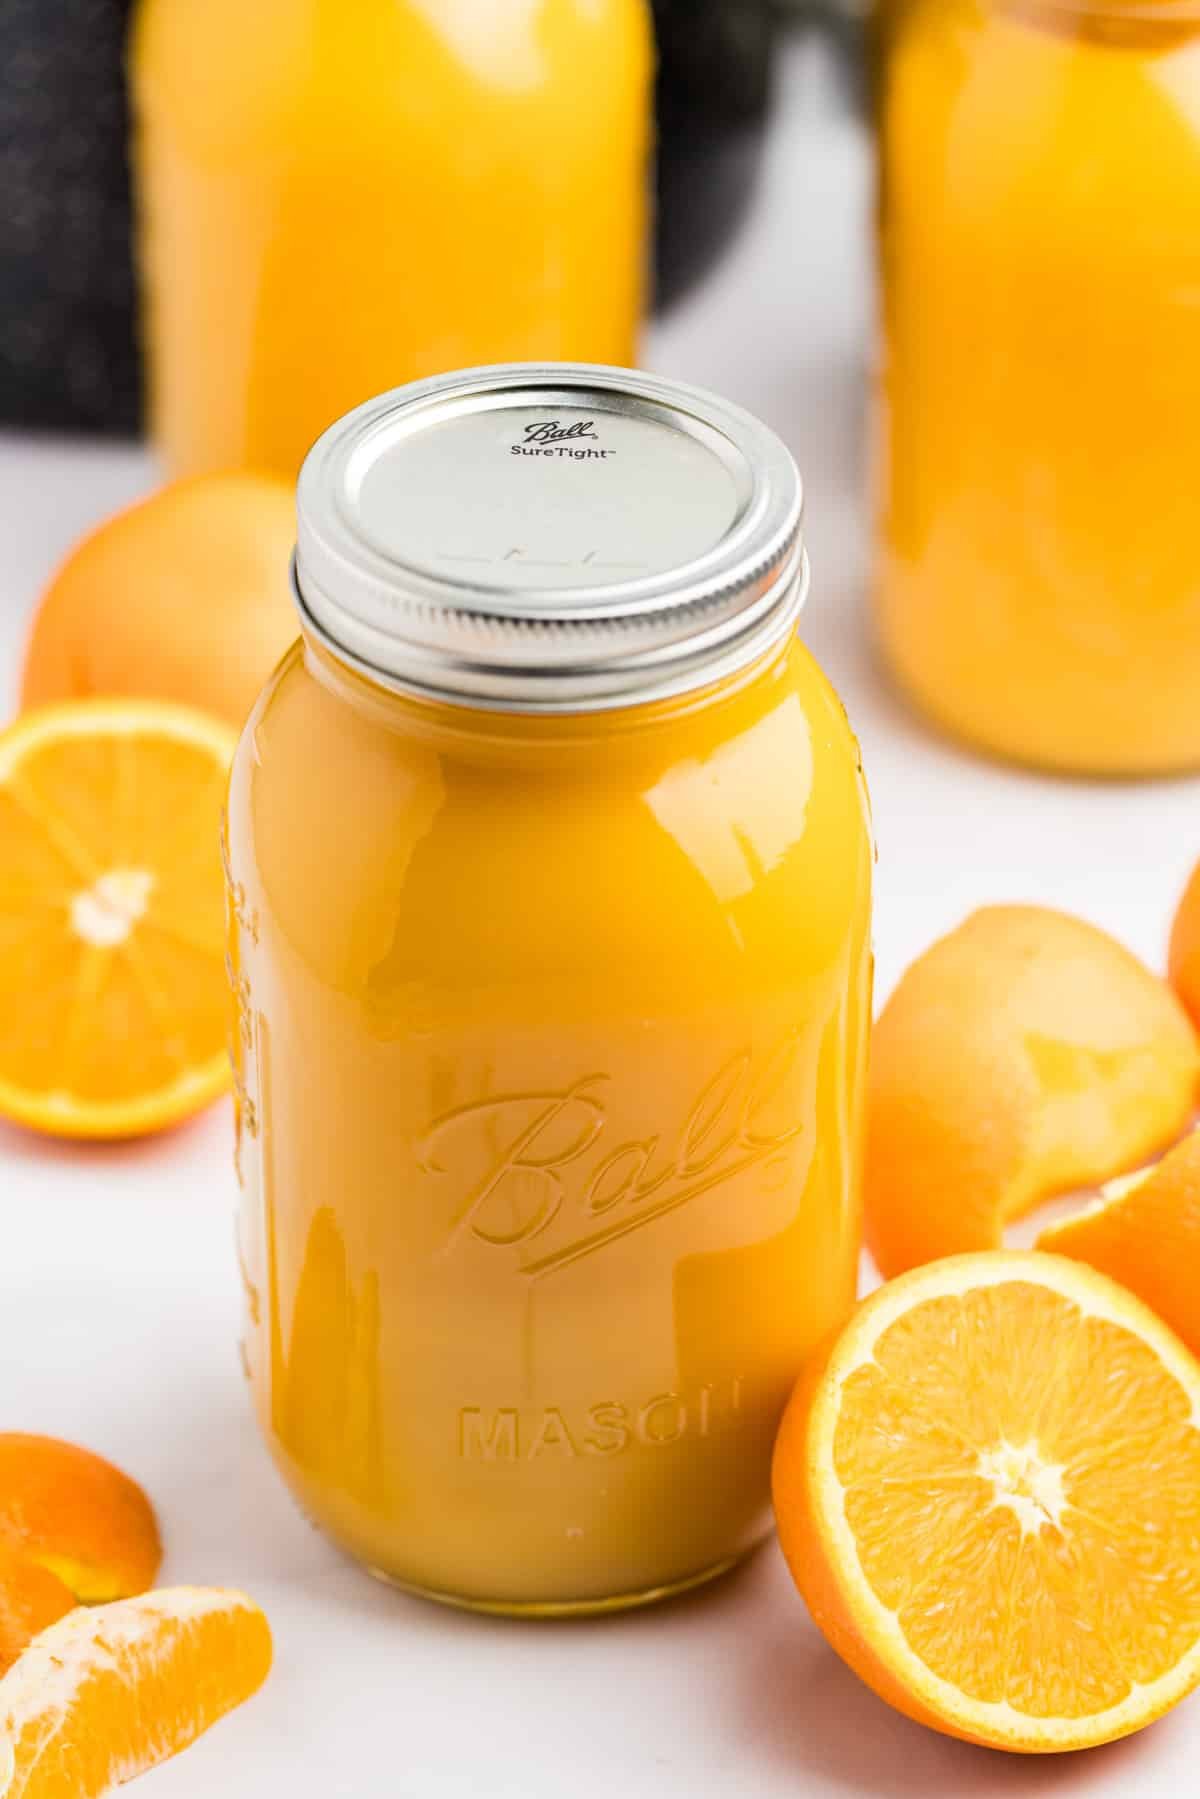 A quart jar filled with orange juice, with some fresh oranges on the counter next to it.